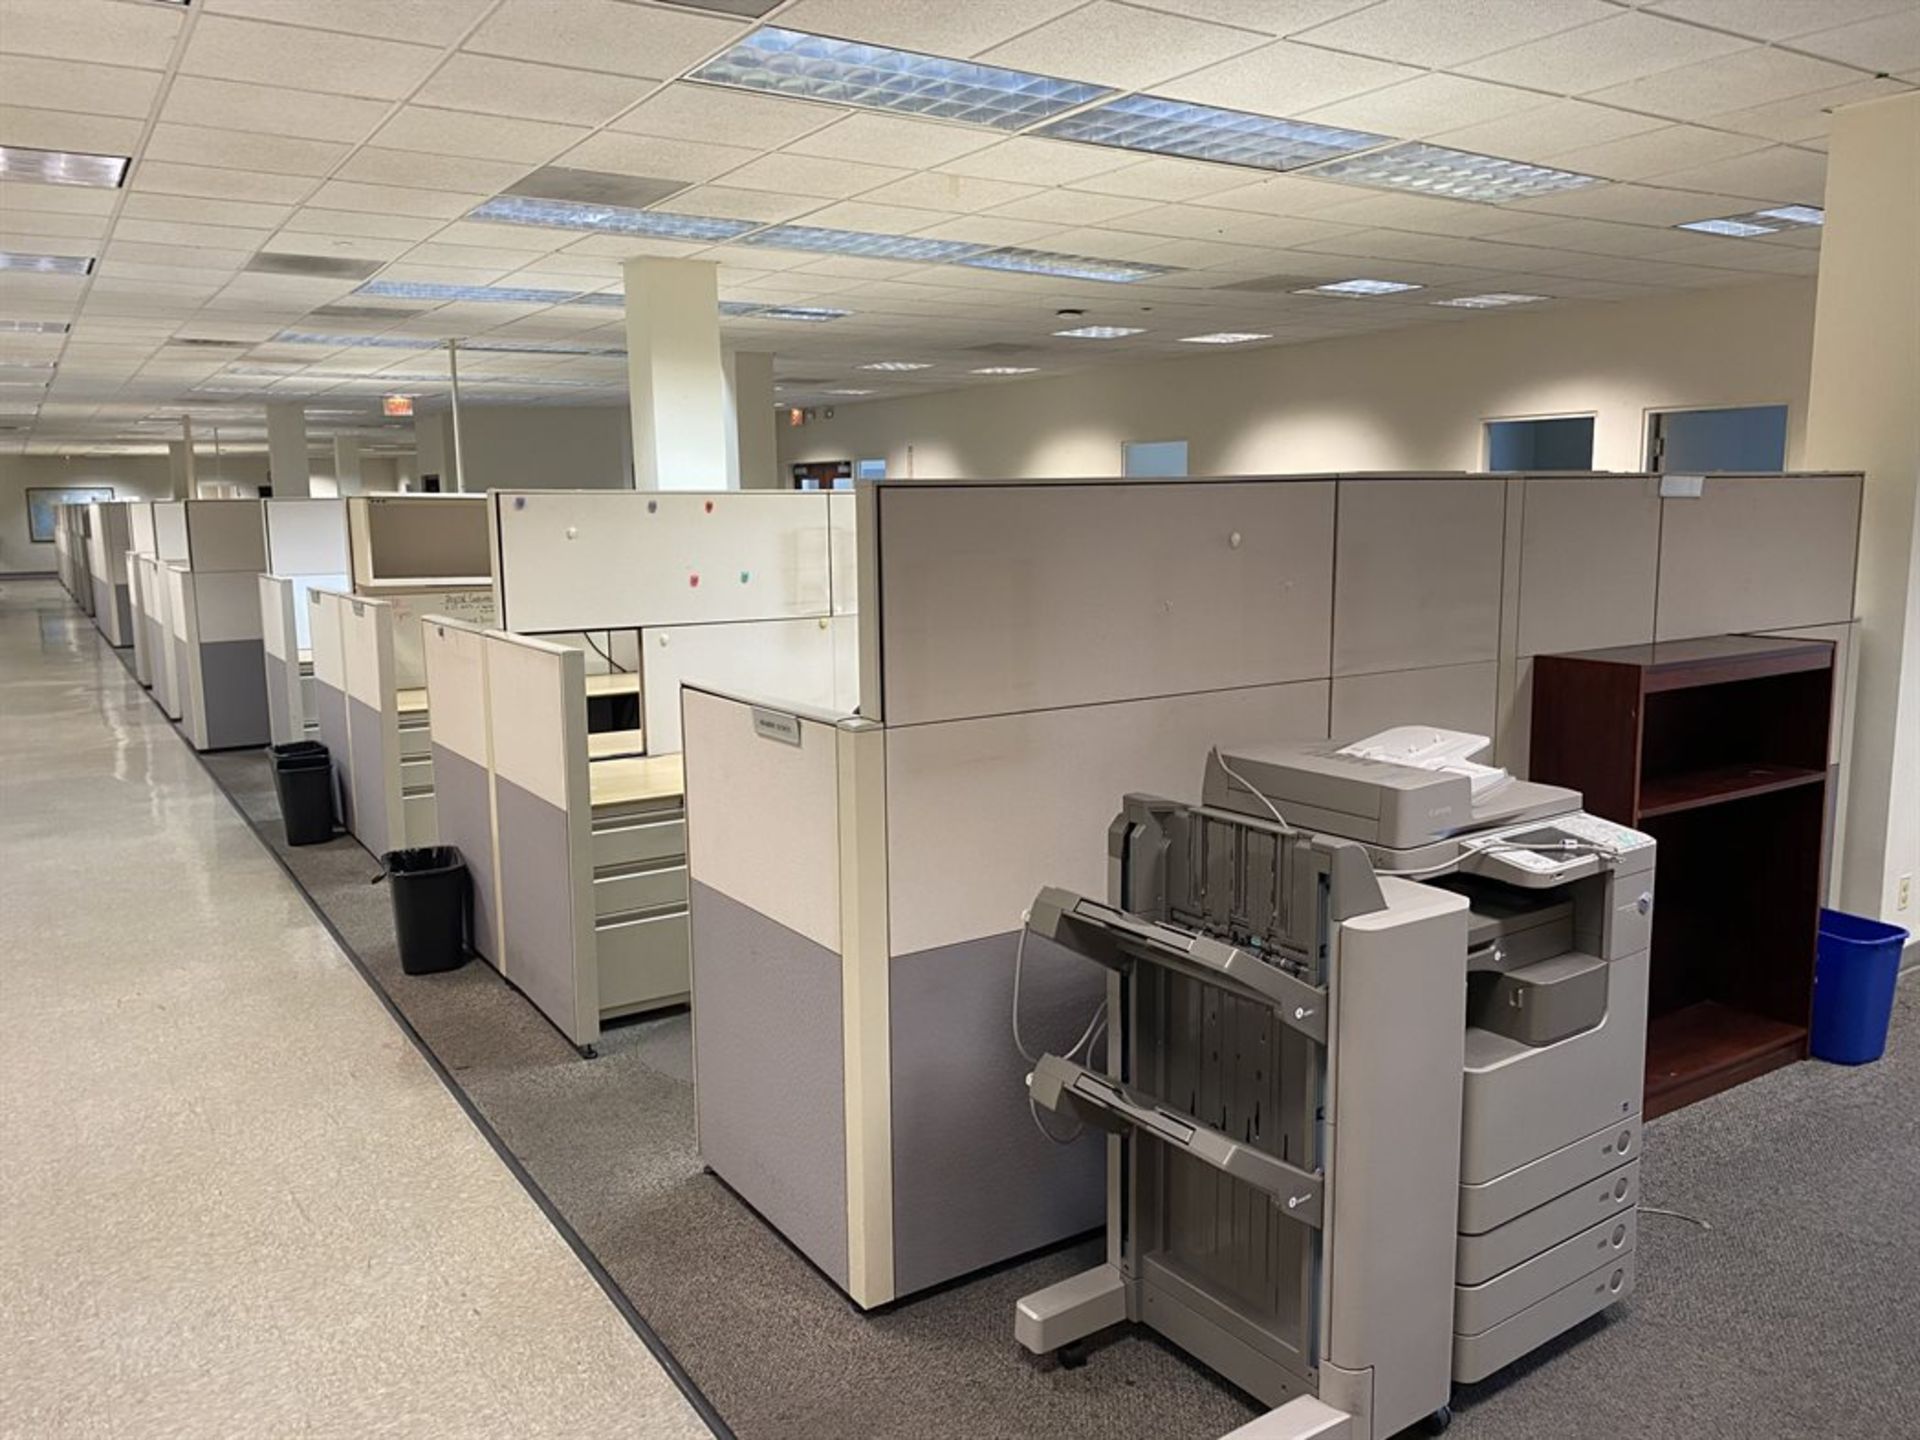 Approximately 40 Office Cubicles - Image 5 of 7